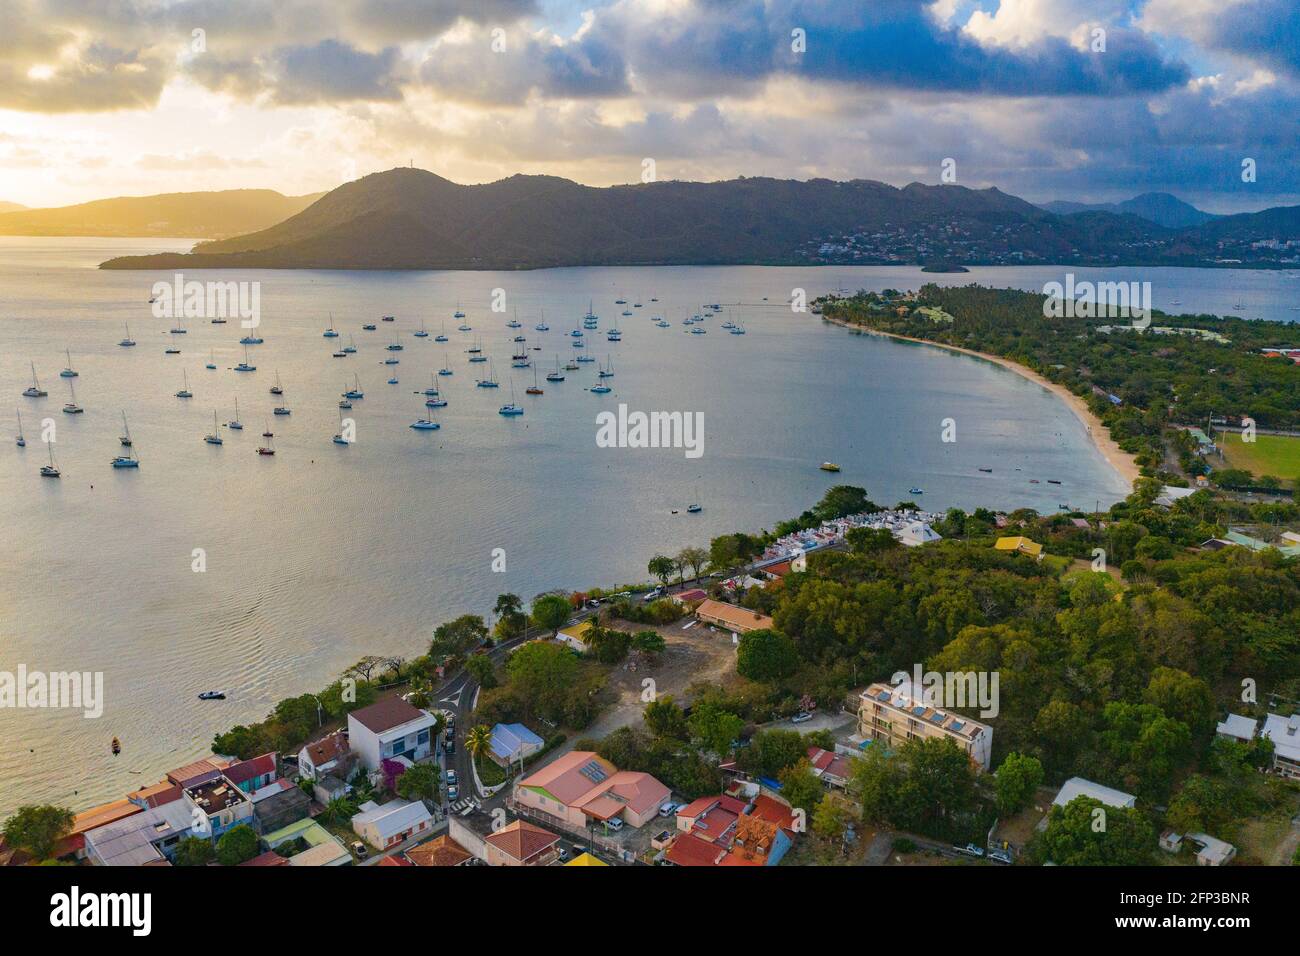 Sainte-Anne is the southernmost town of Martinique. It overlooks the magnificent bay which accommodates a large number of boats Stock Photo